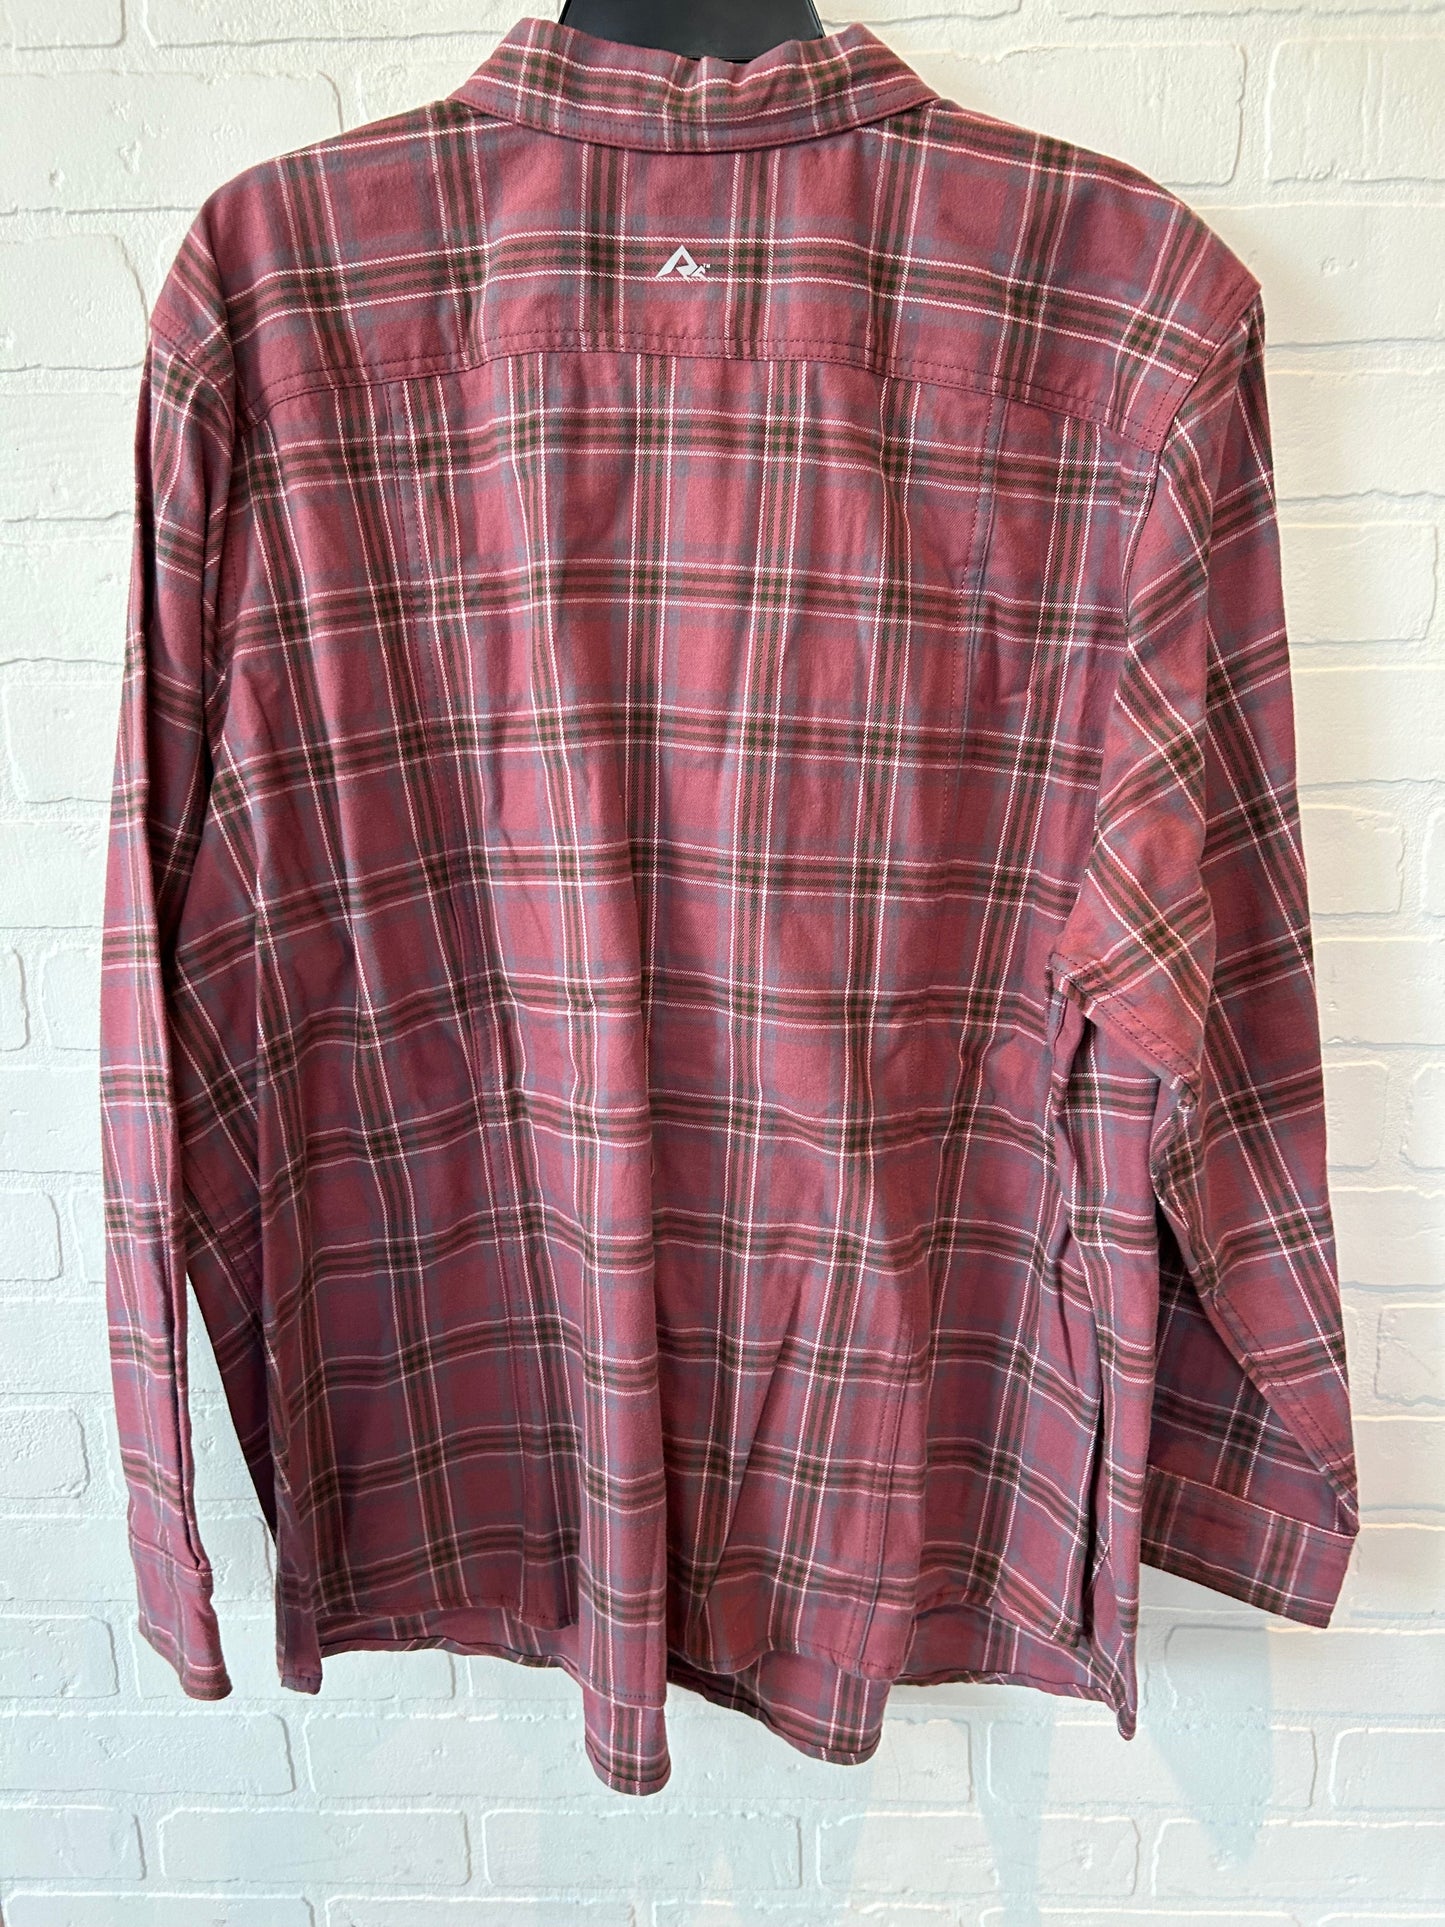 Pink Top Long Sleeve Cmc, Size 3x